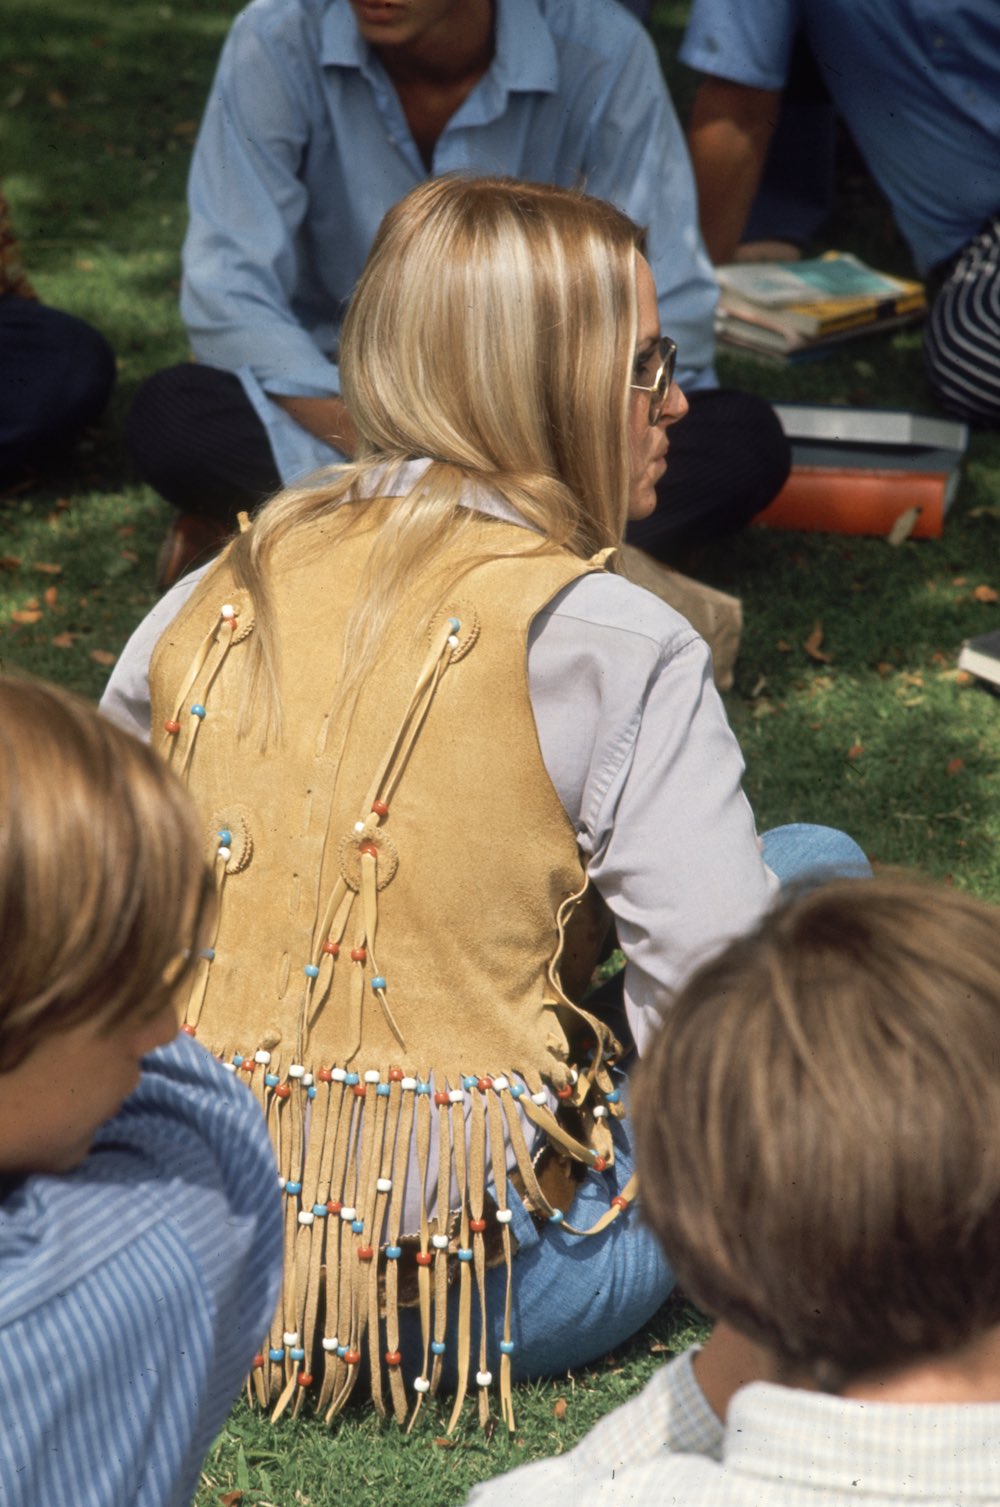 Subject: Southern California high schooler wearing a buckskin vest and other hippy fashion. California October 1969 Photographer- Arthur Schatz Time Inc Owned merlin- 1201954